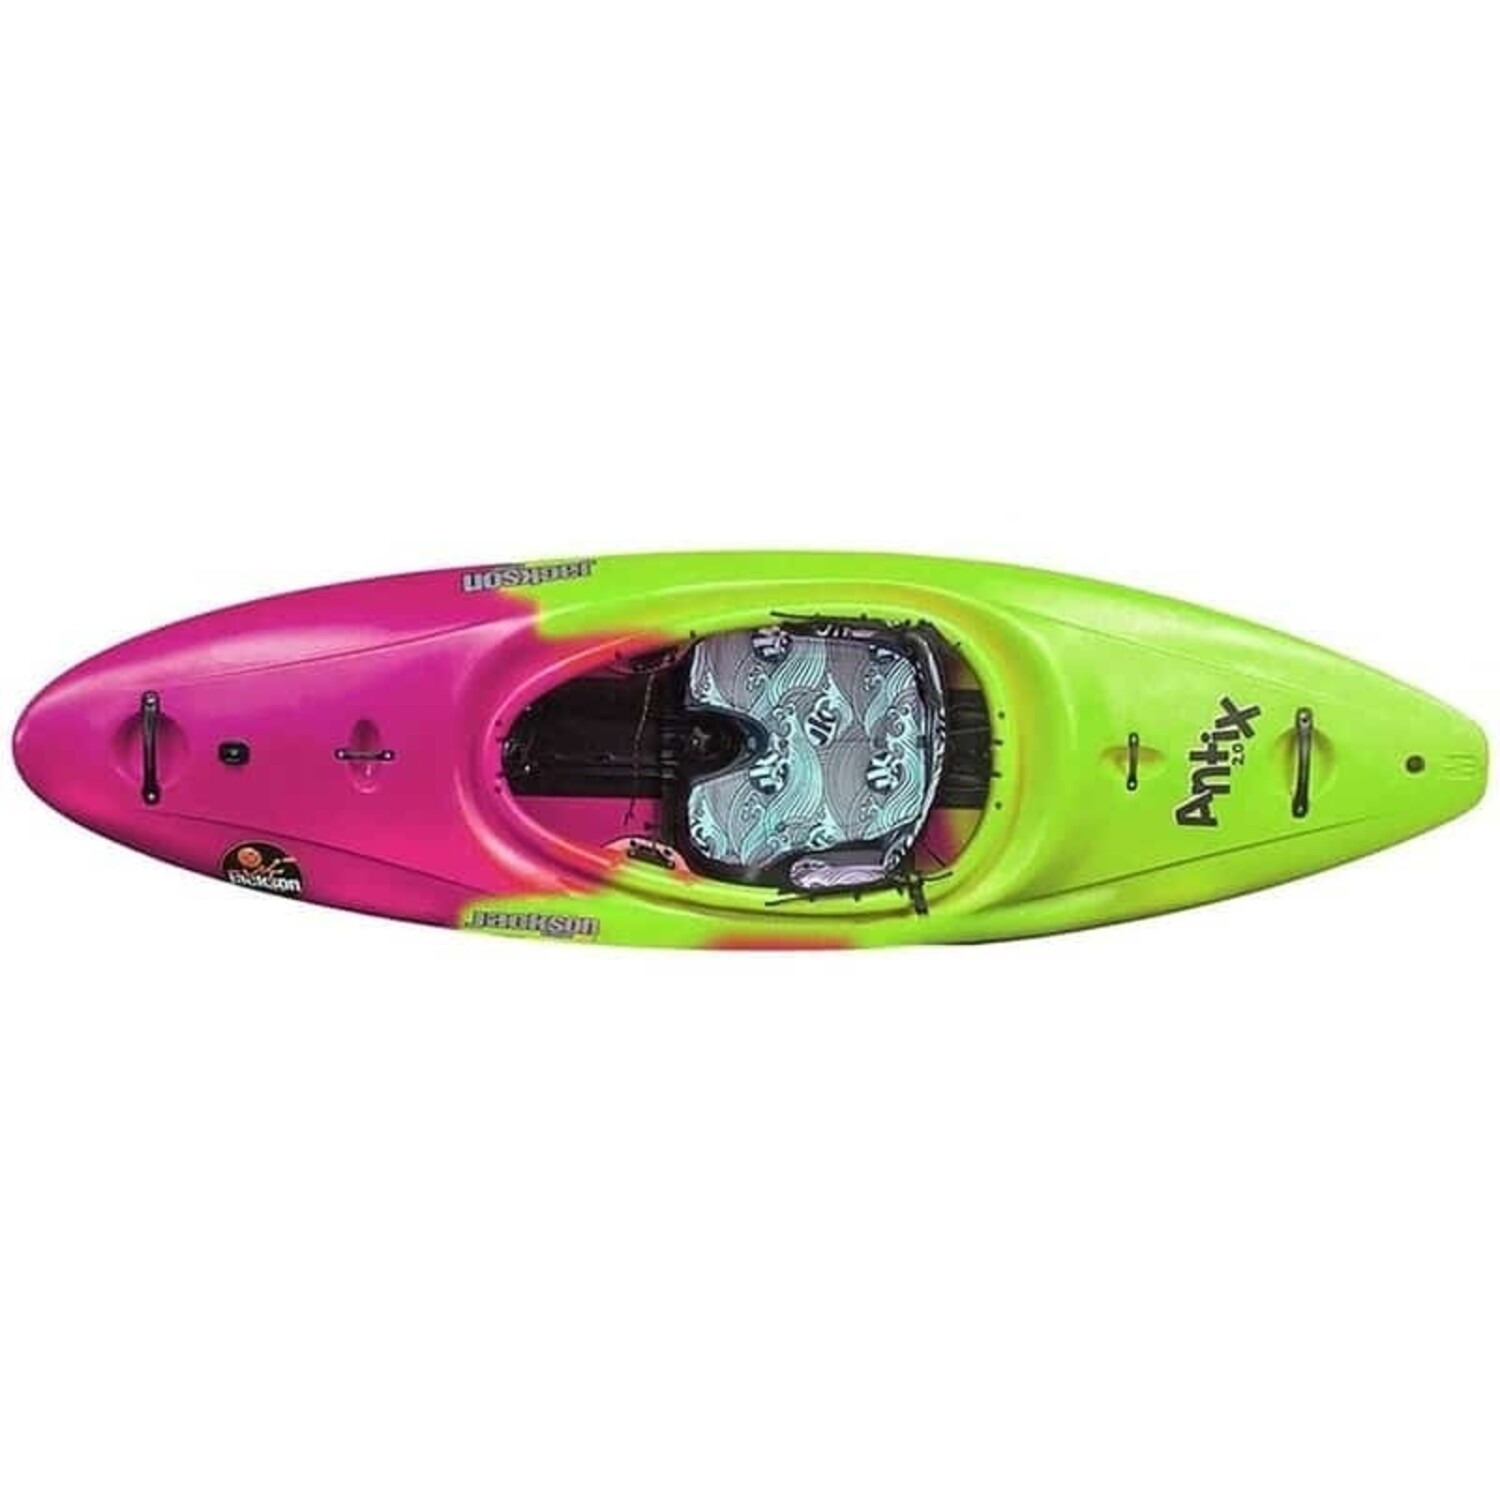 Jackson Kayak Antix 2.0 2022 - The Outfitters Shop at Zoar Outdoor